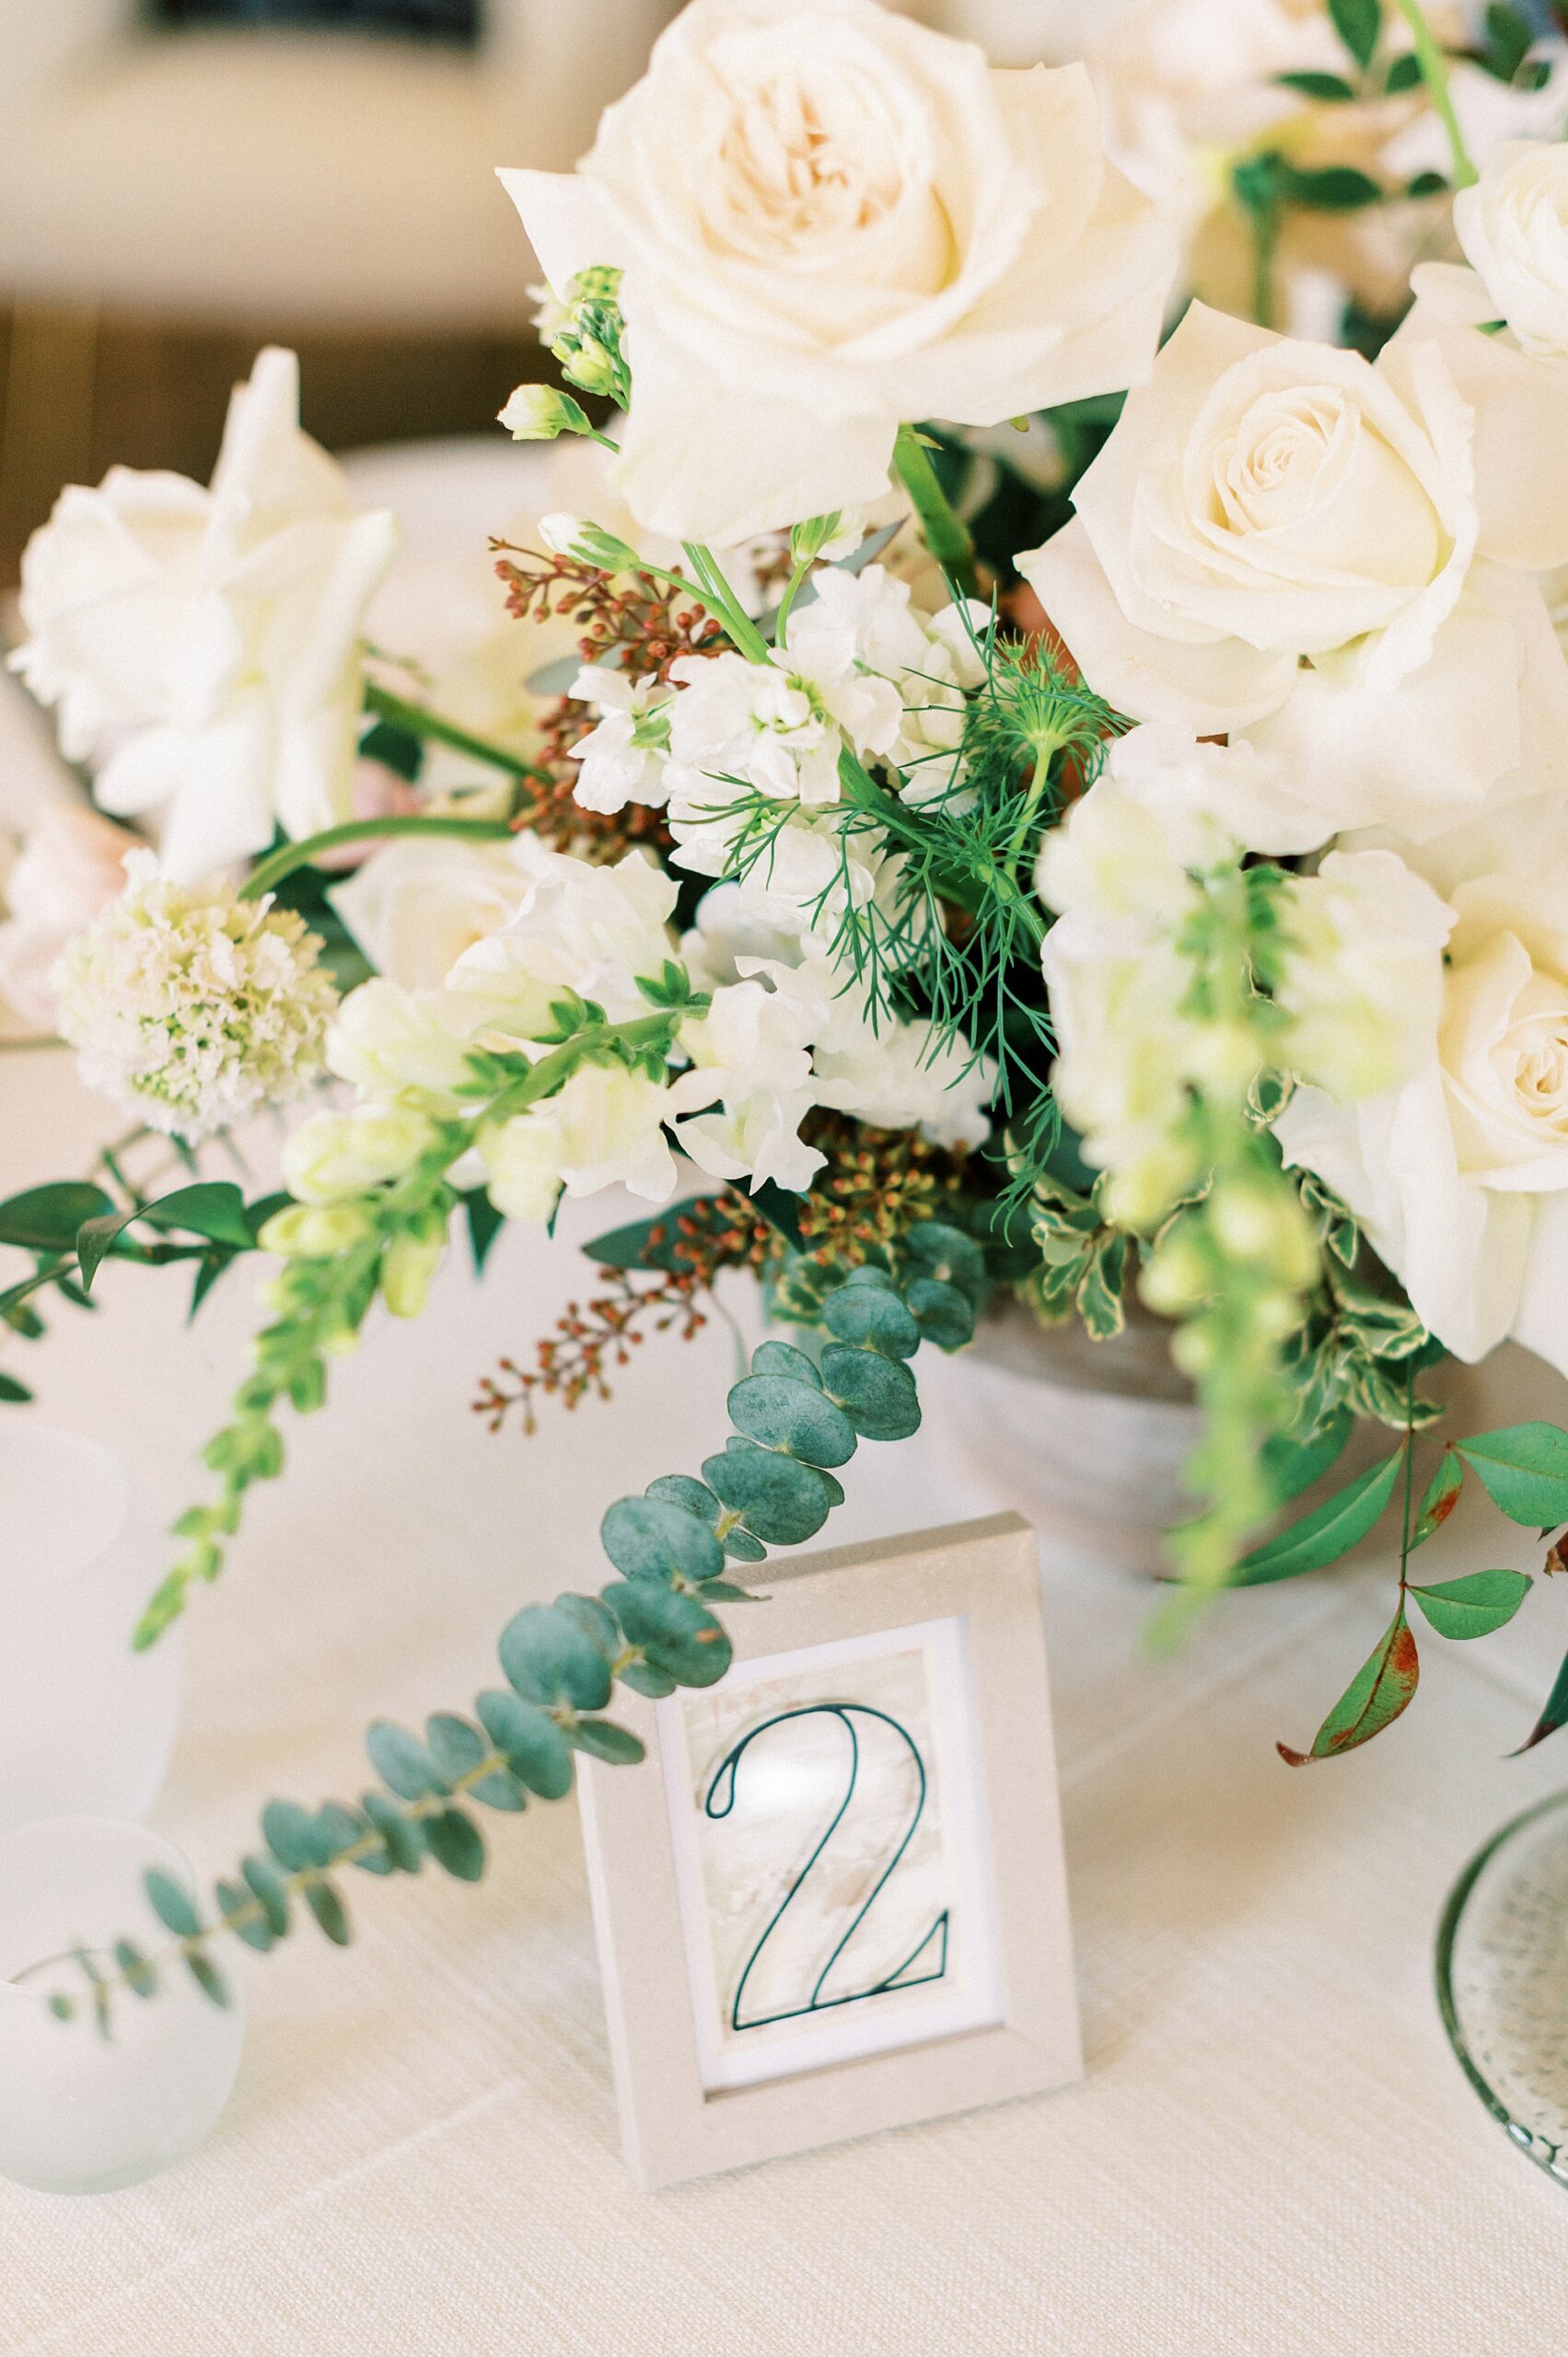 ivory rose centerpiece with table number for spring wedding reception 